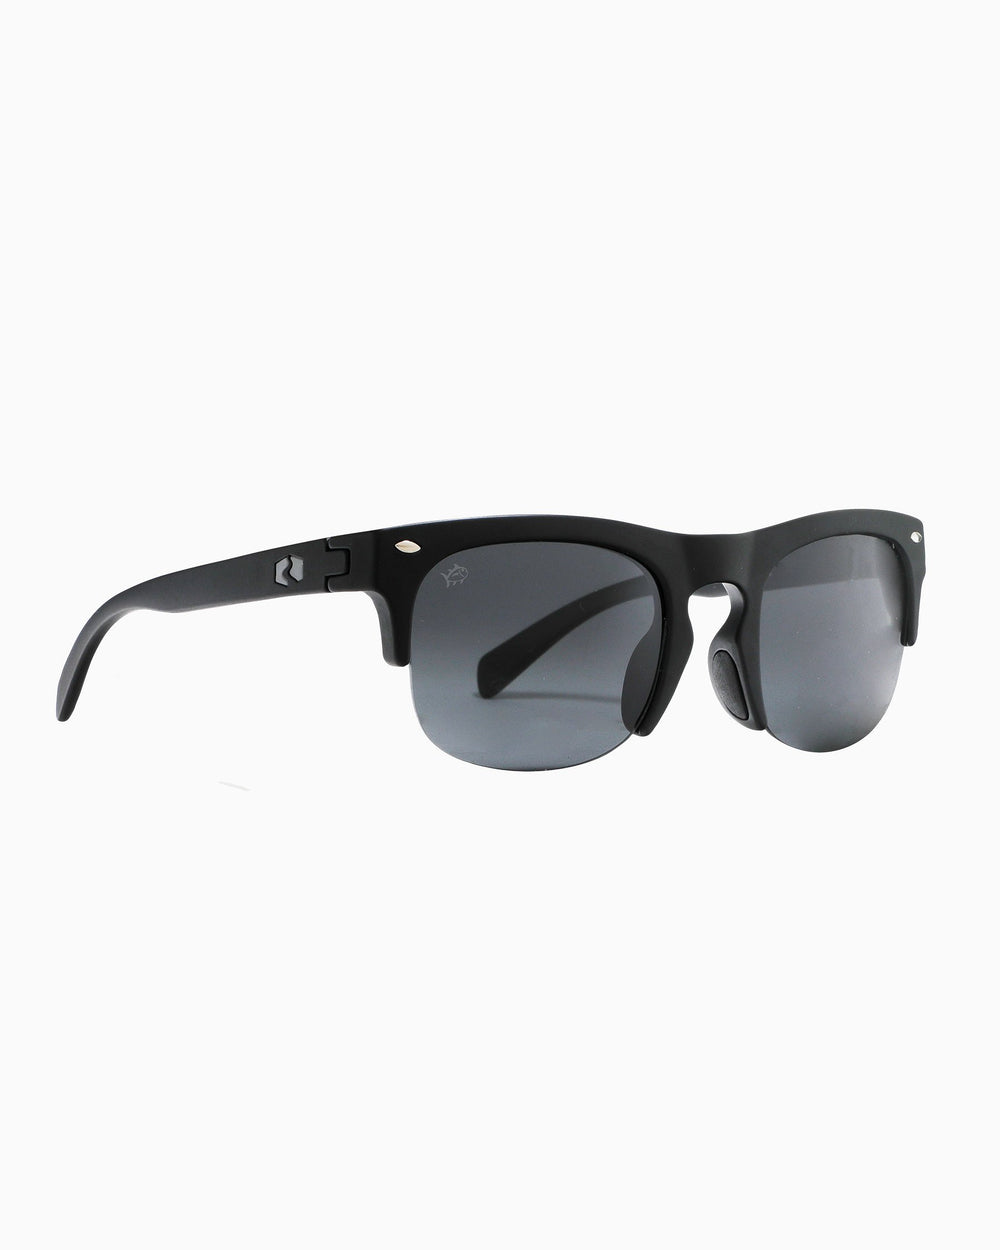 The side of the Men's Rheos Sullivans Sunglasses by Southern Tide - Gunmetal